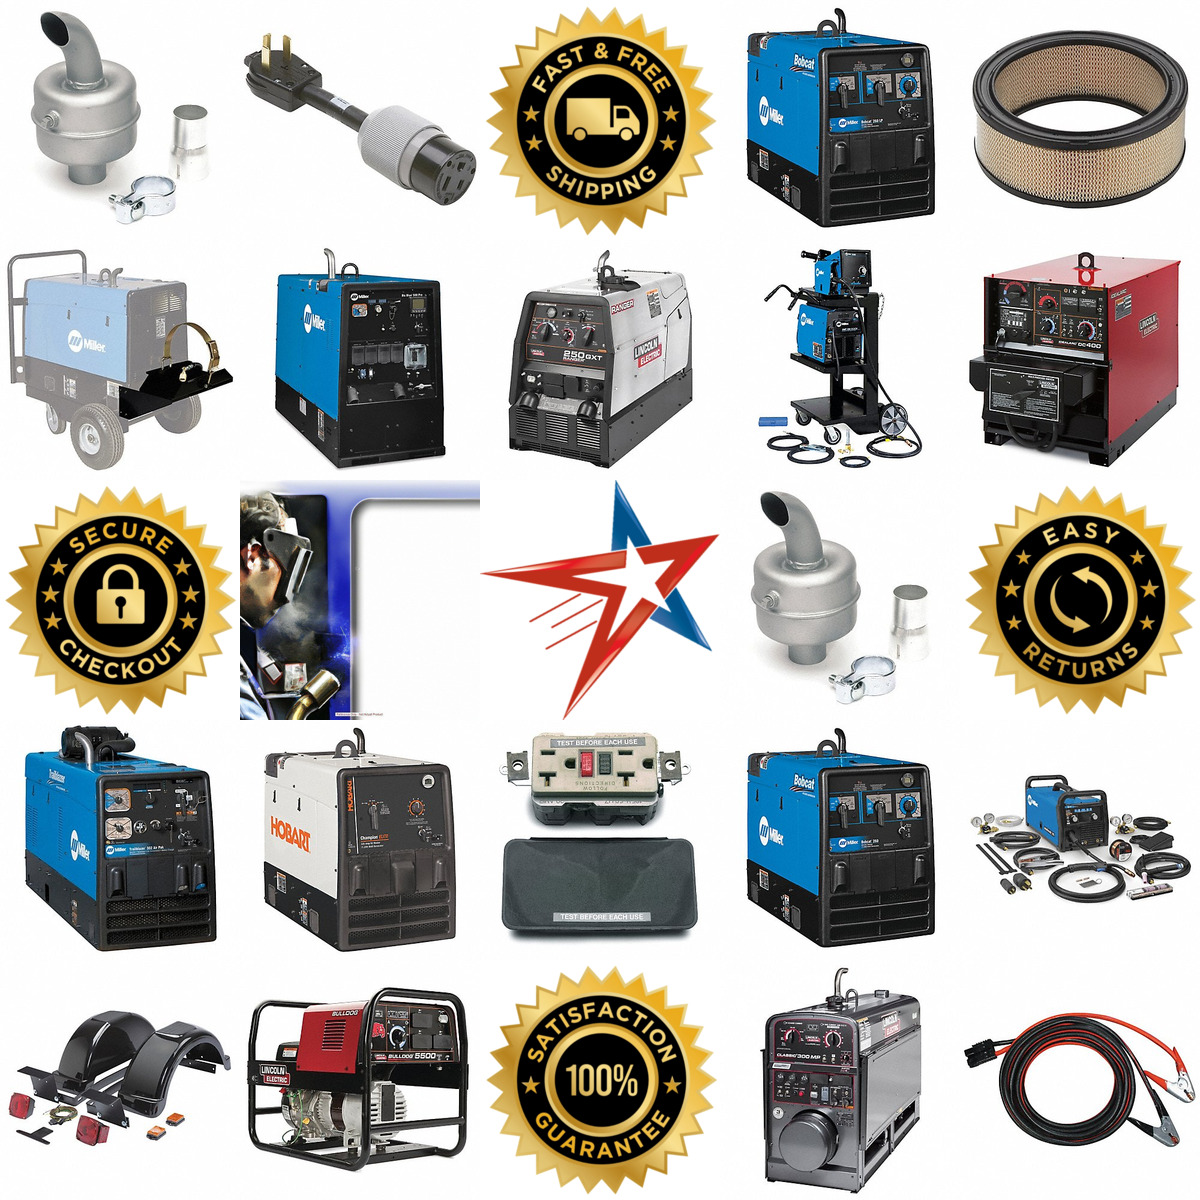 A selection of Multiprocess and Engine Driven Welders and Accesso products on GoVets